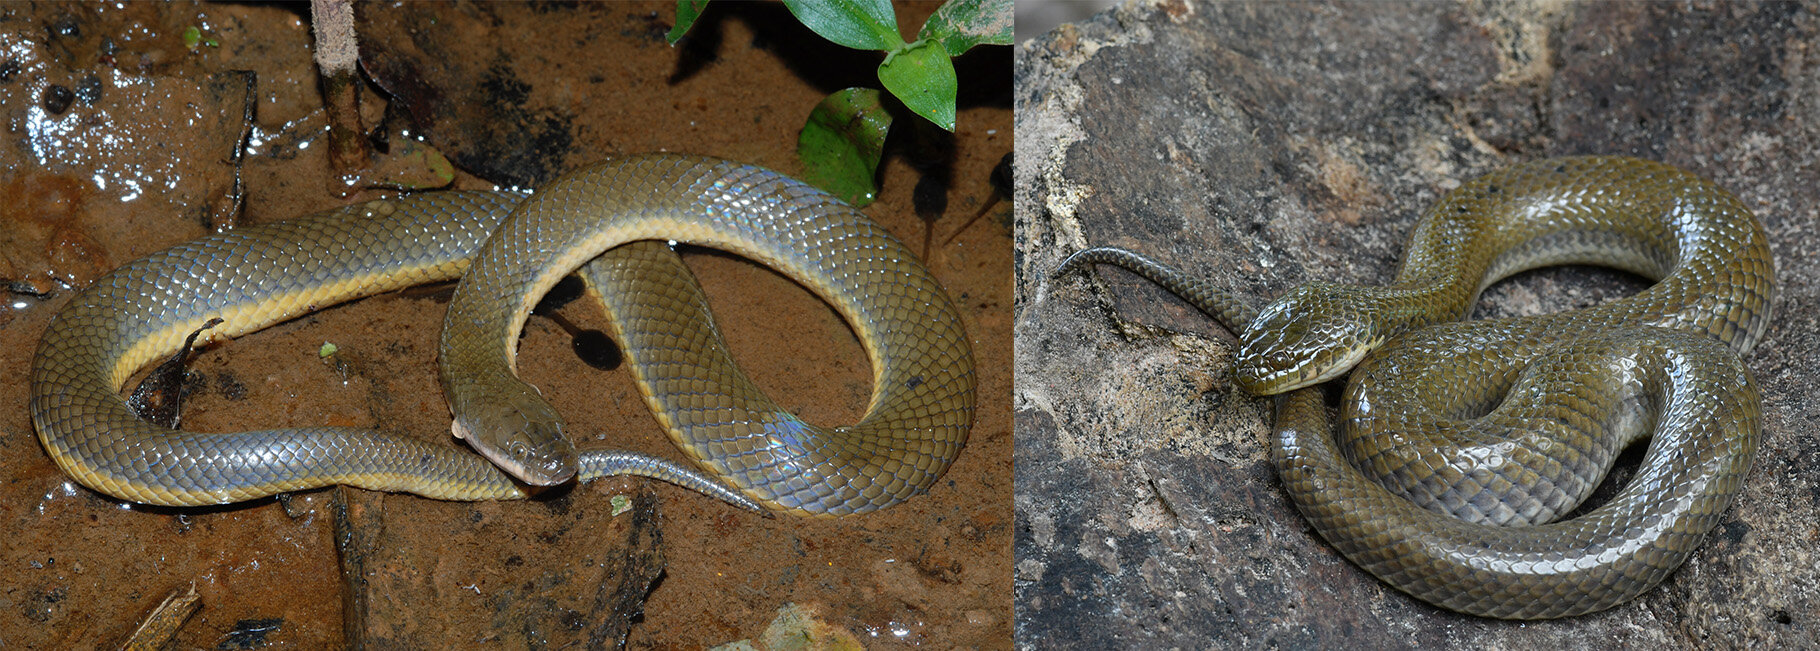 Rice paddy snake diversification was driven by geological and environmental factors in Thailand, molecular data suggest